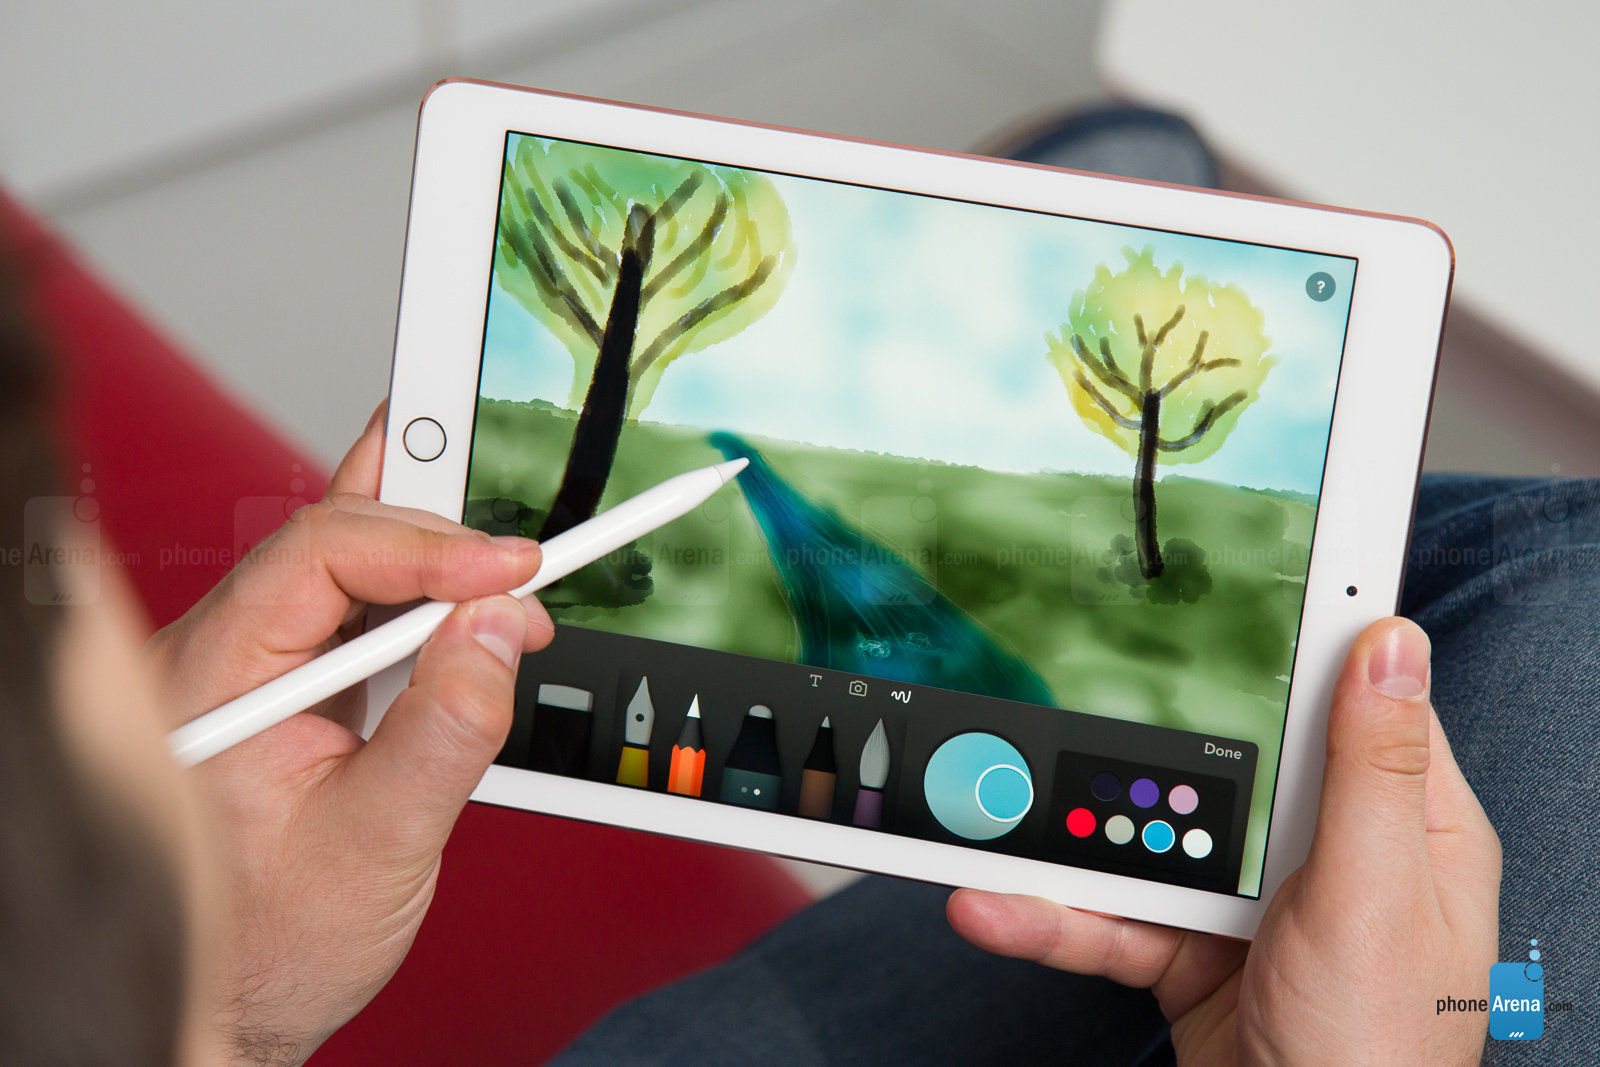 Digitally Transform Your Artwork Best iPad Pro Apps for